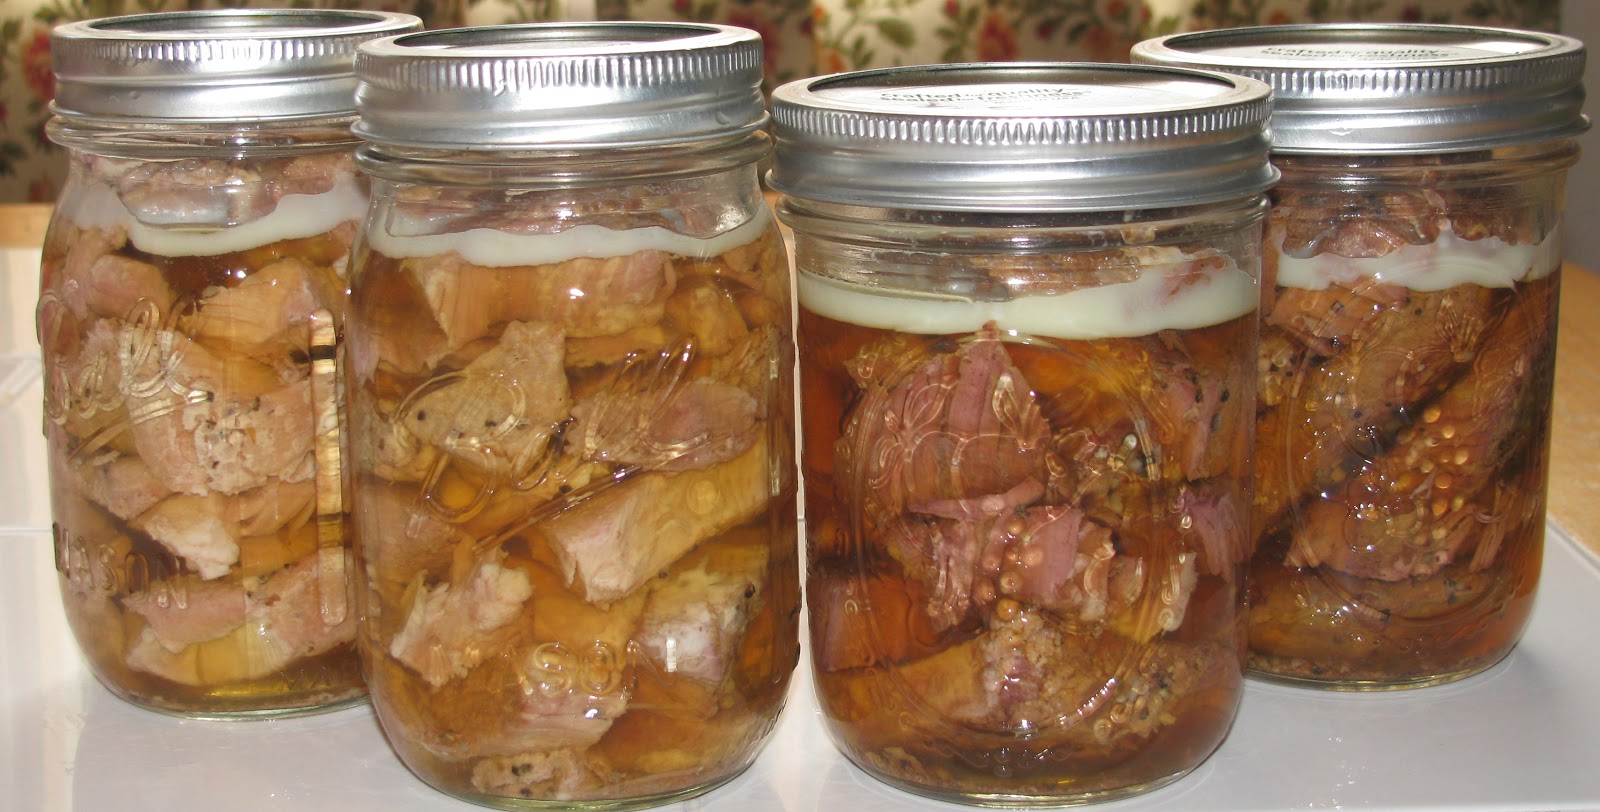 A Different Method for Canning Pork (and Beef Steaks) | Proverbs 31 Woman